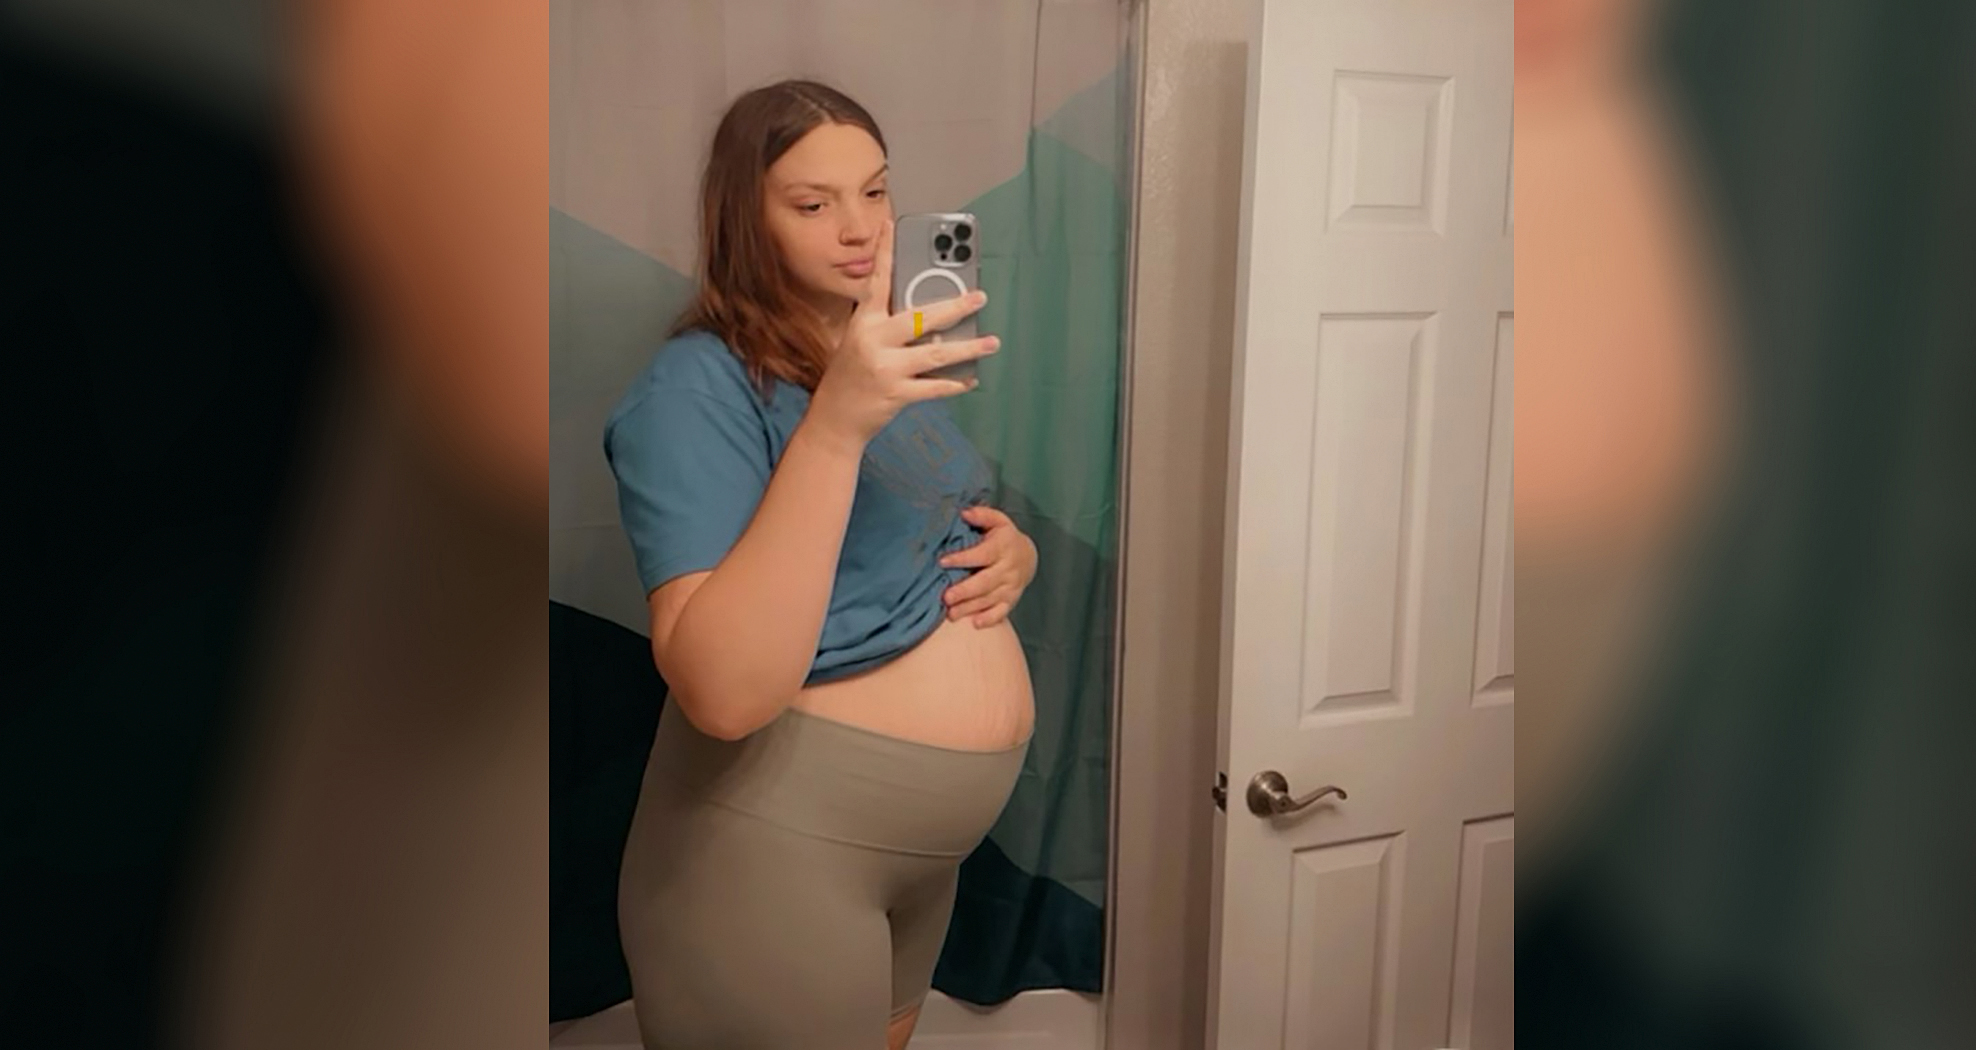 Relate to all your pregnant friends now with this VR pregnancy